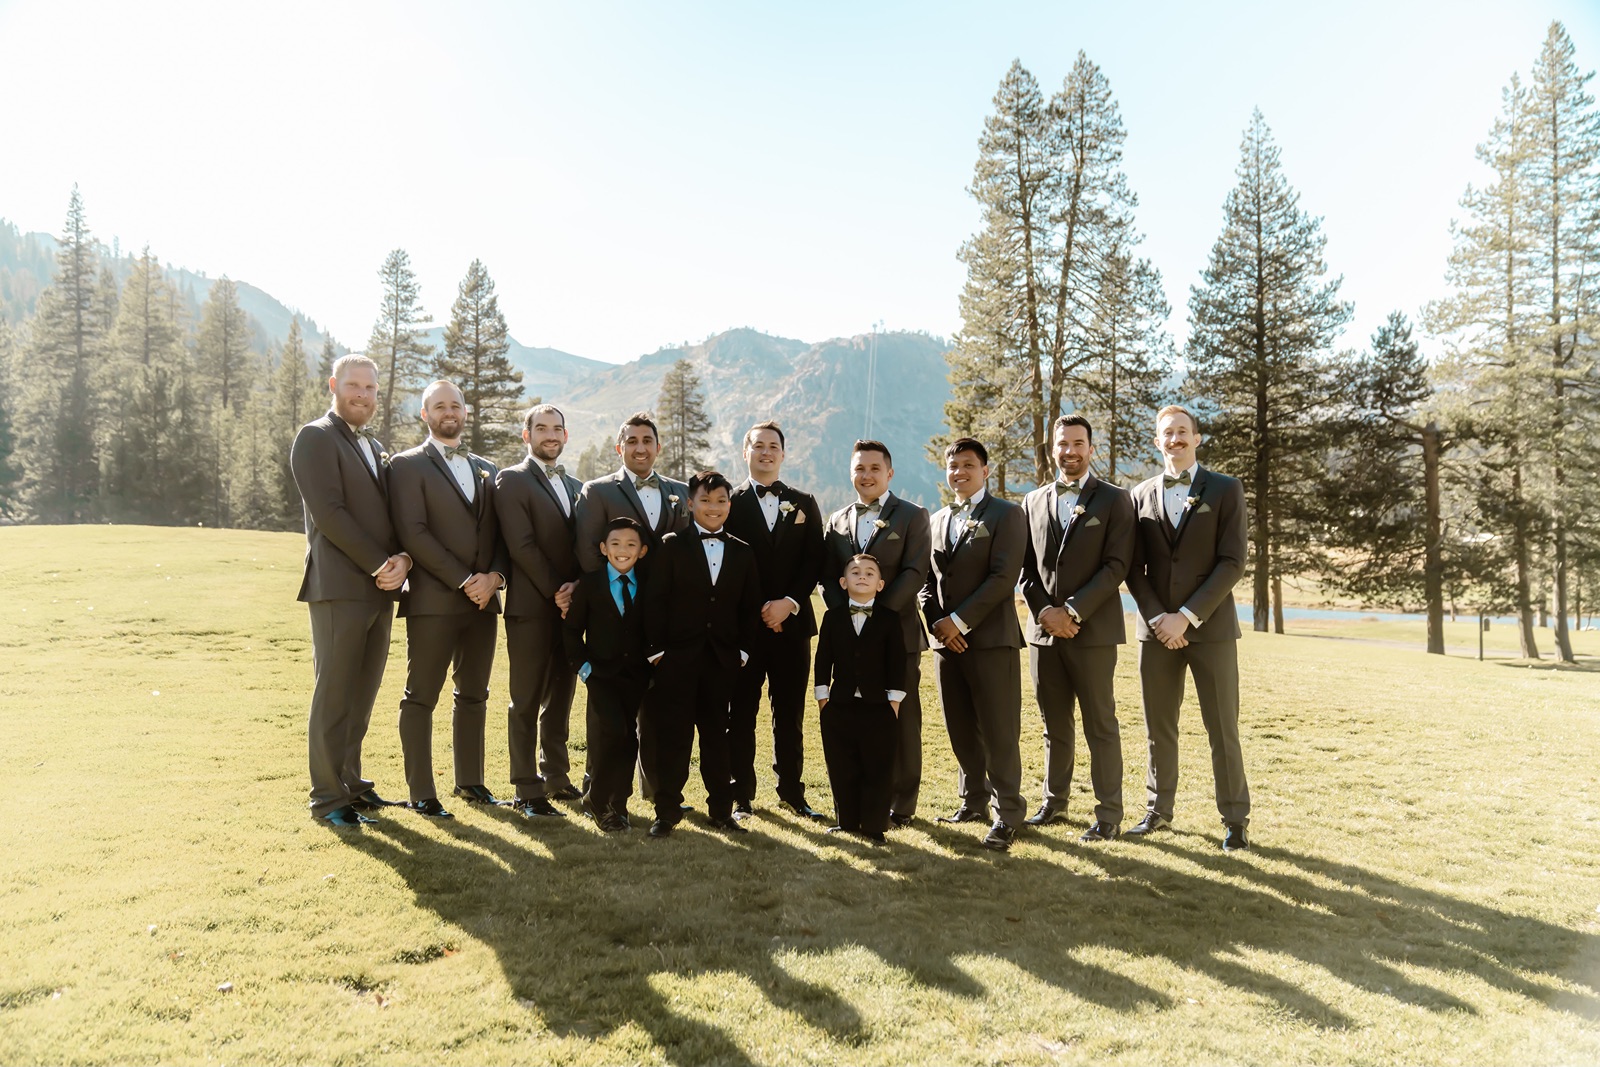 Groomsmen in matching suits pose at Everline Resort and Spa